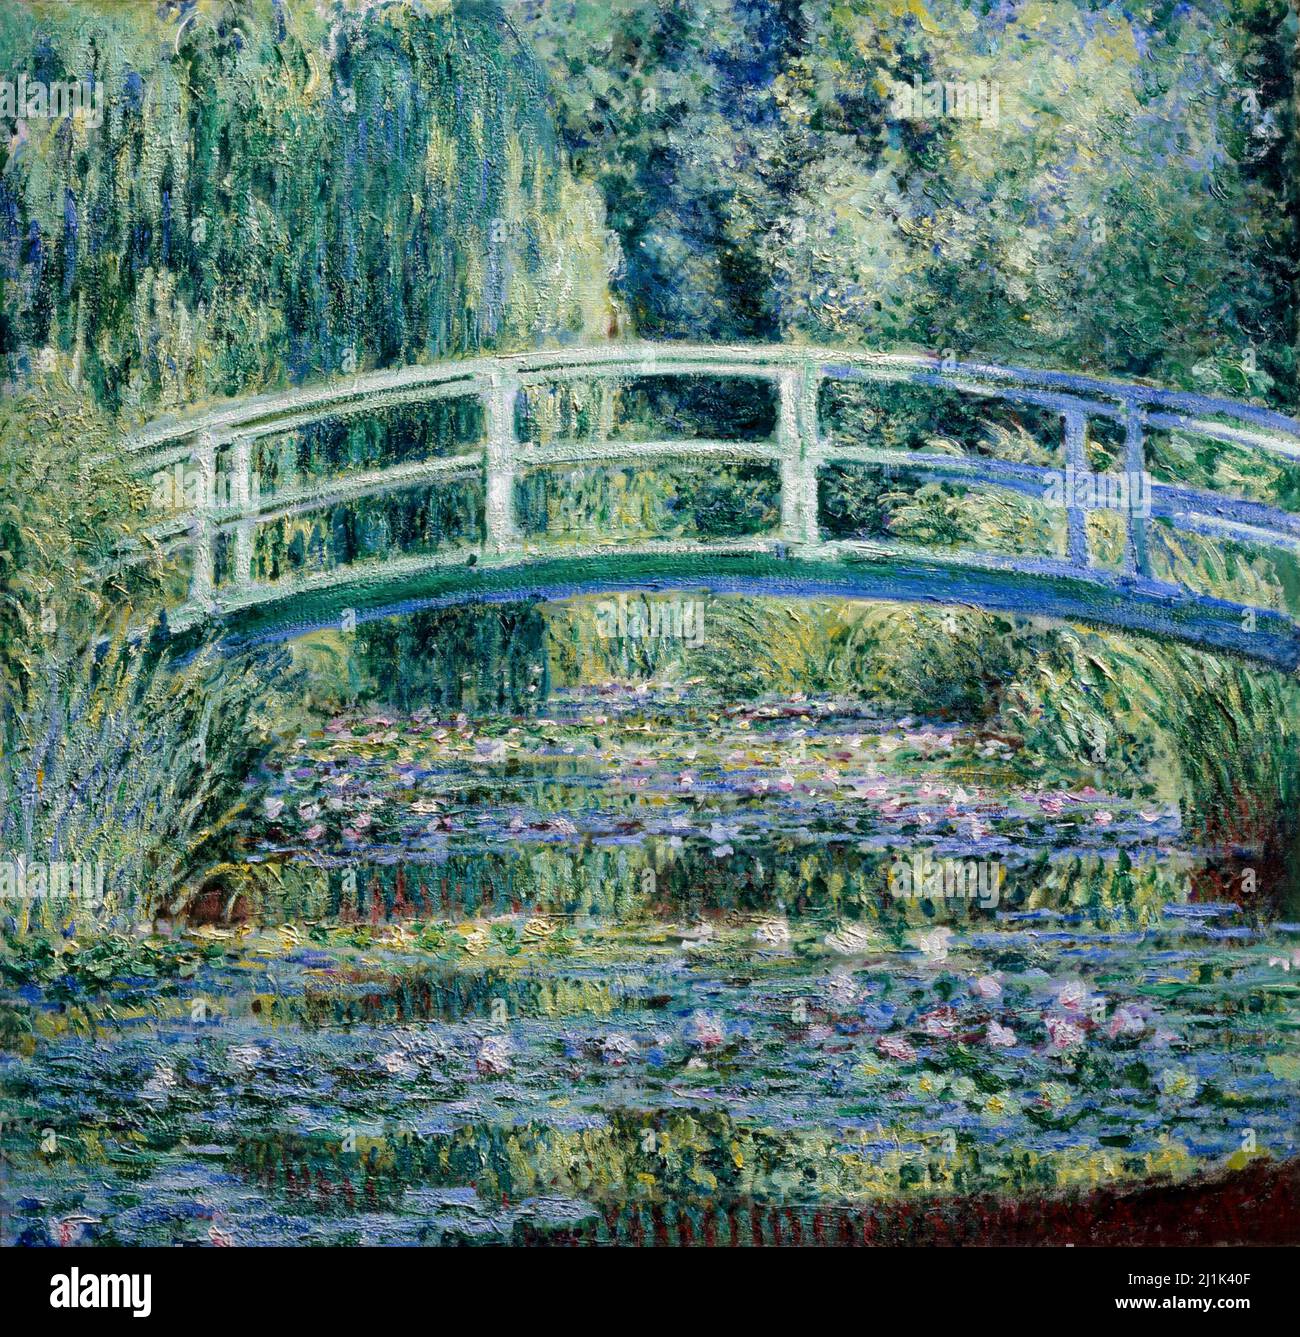 Claude Monet's Water Lilies and Japanese Bridge (1899) famous painting Stock Photo